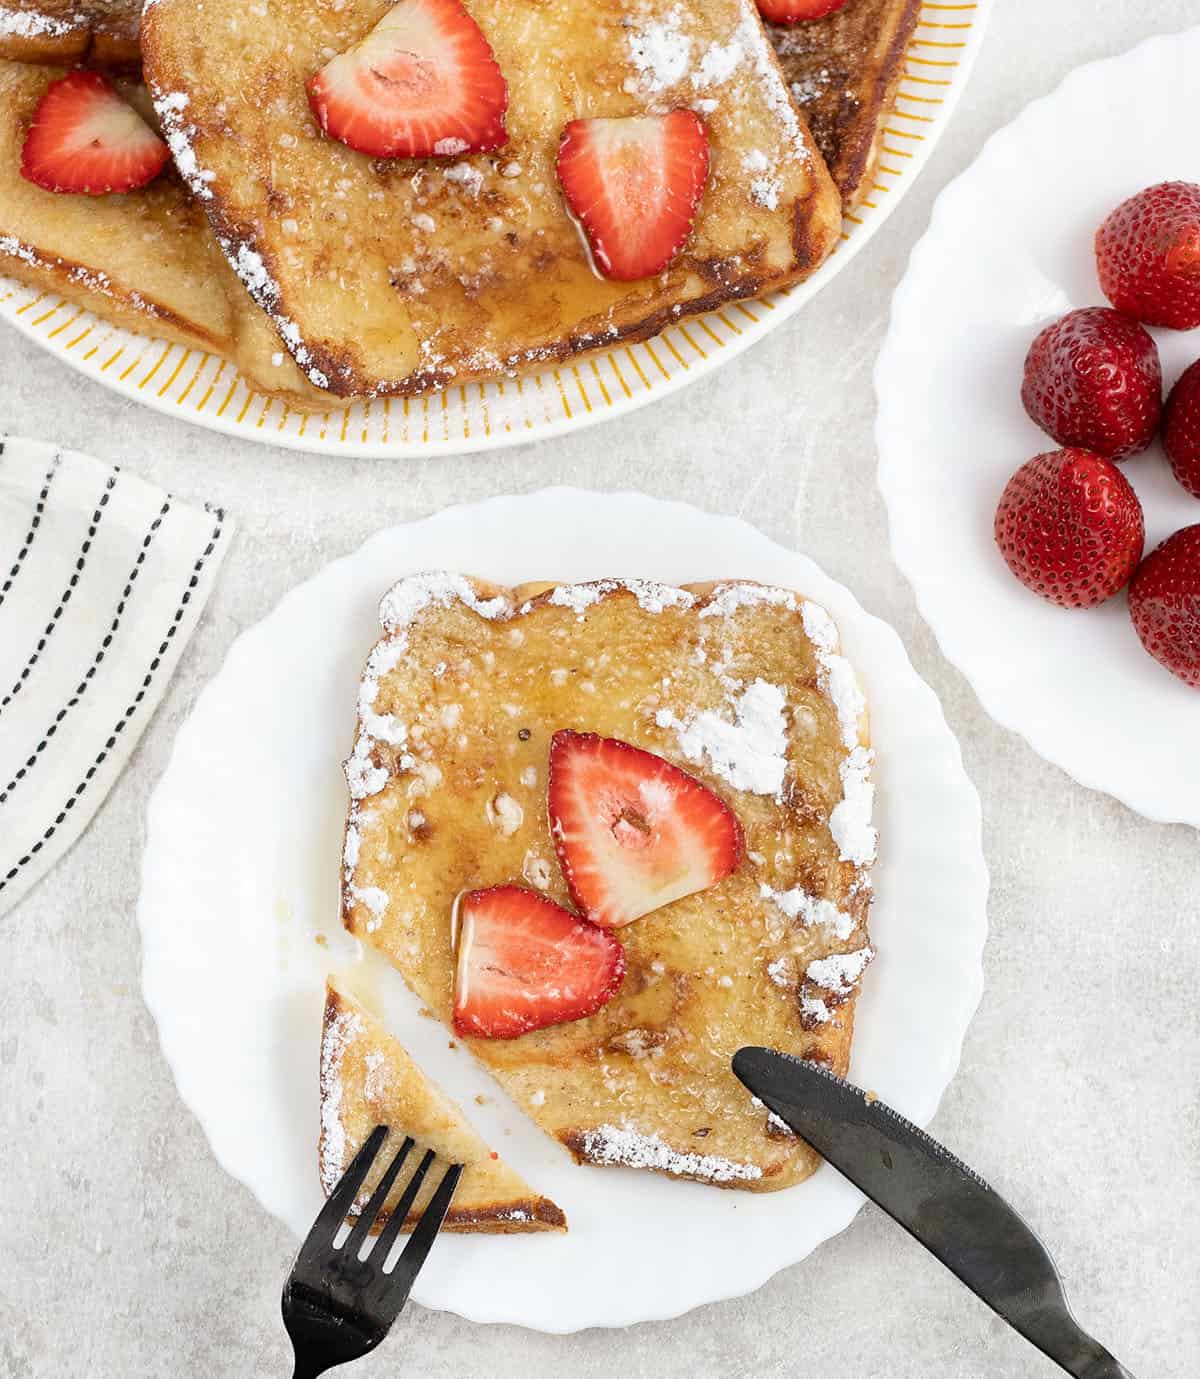 Sourdough French Toast in a plate